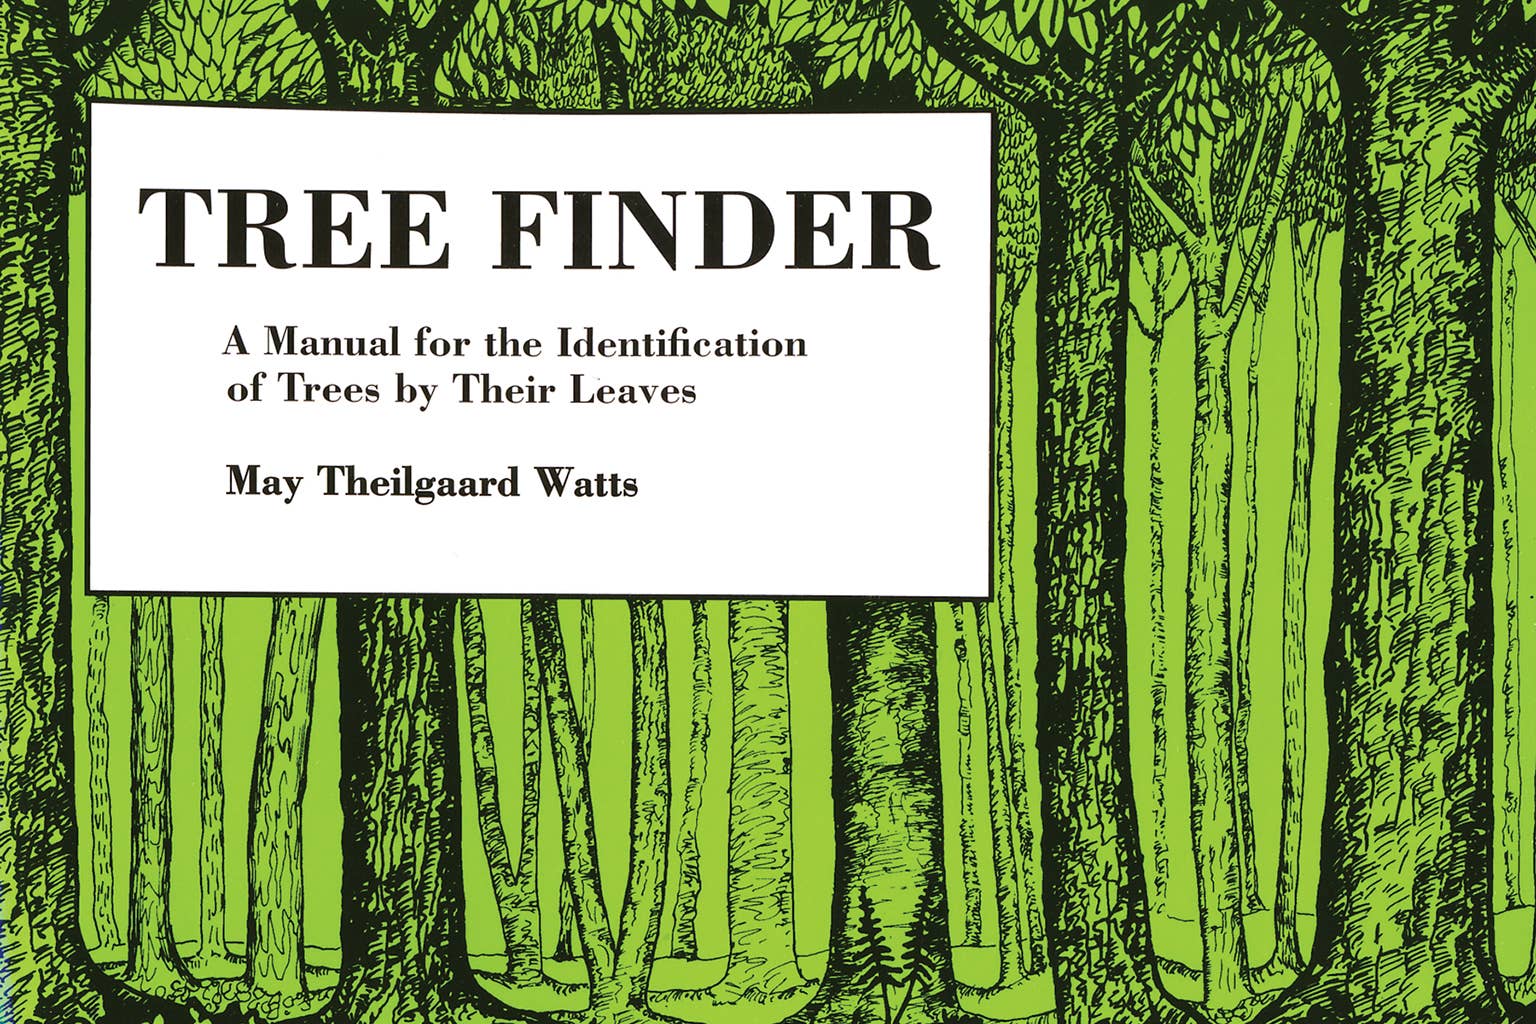 Cover of the book "Tree Finder Eastern" by May Theilgaard Watts featuring illustrations of tall trees and dense foliage, serving as a trees identification guide.